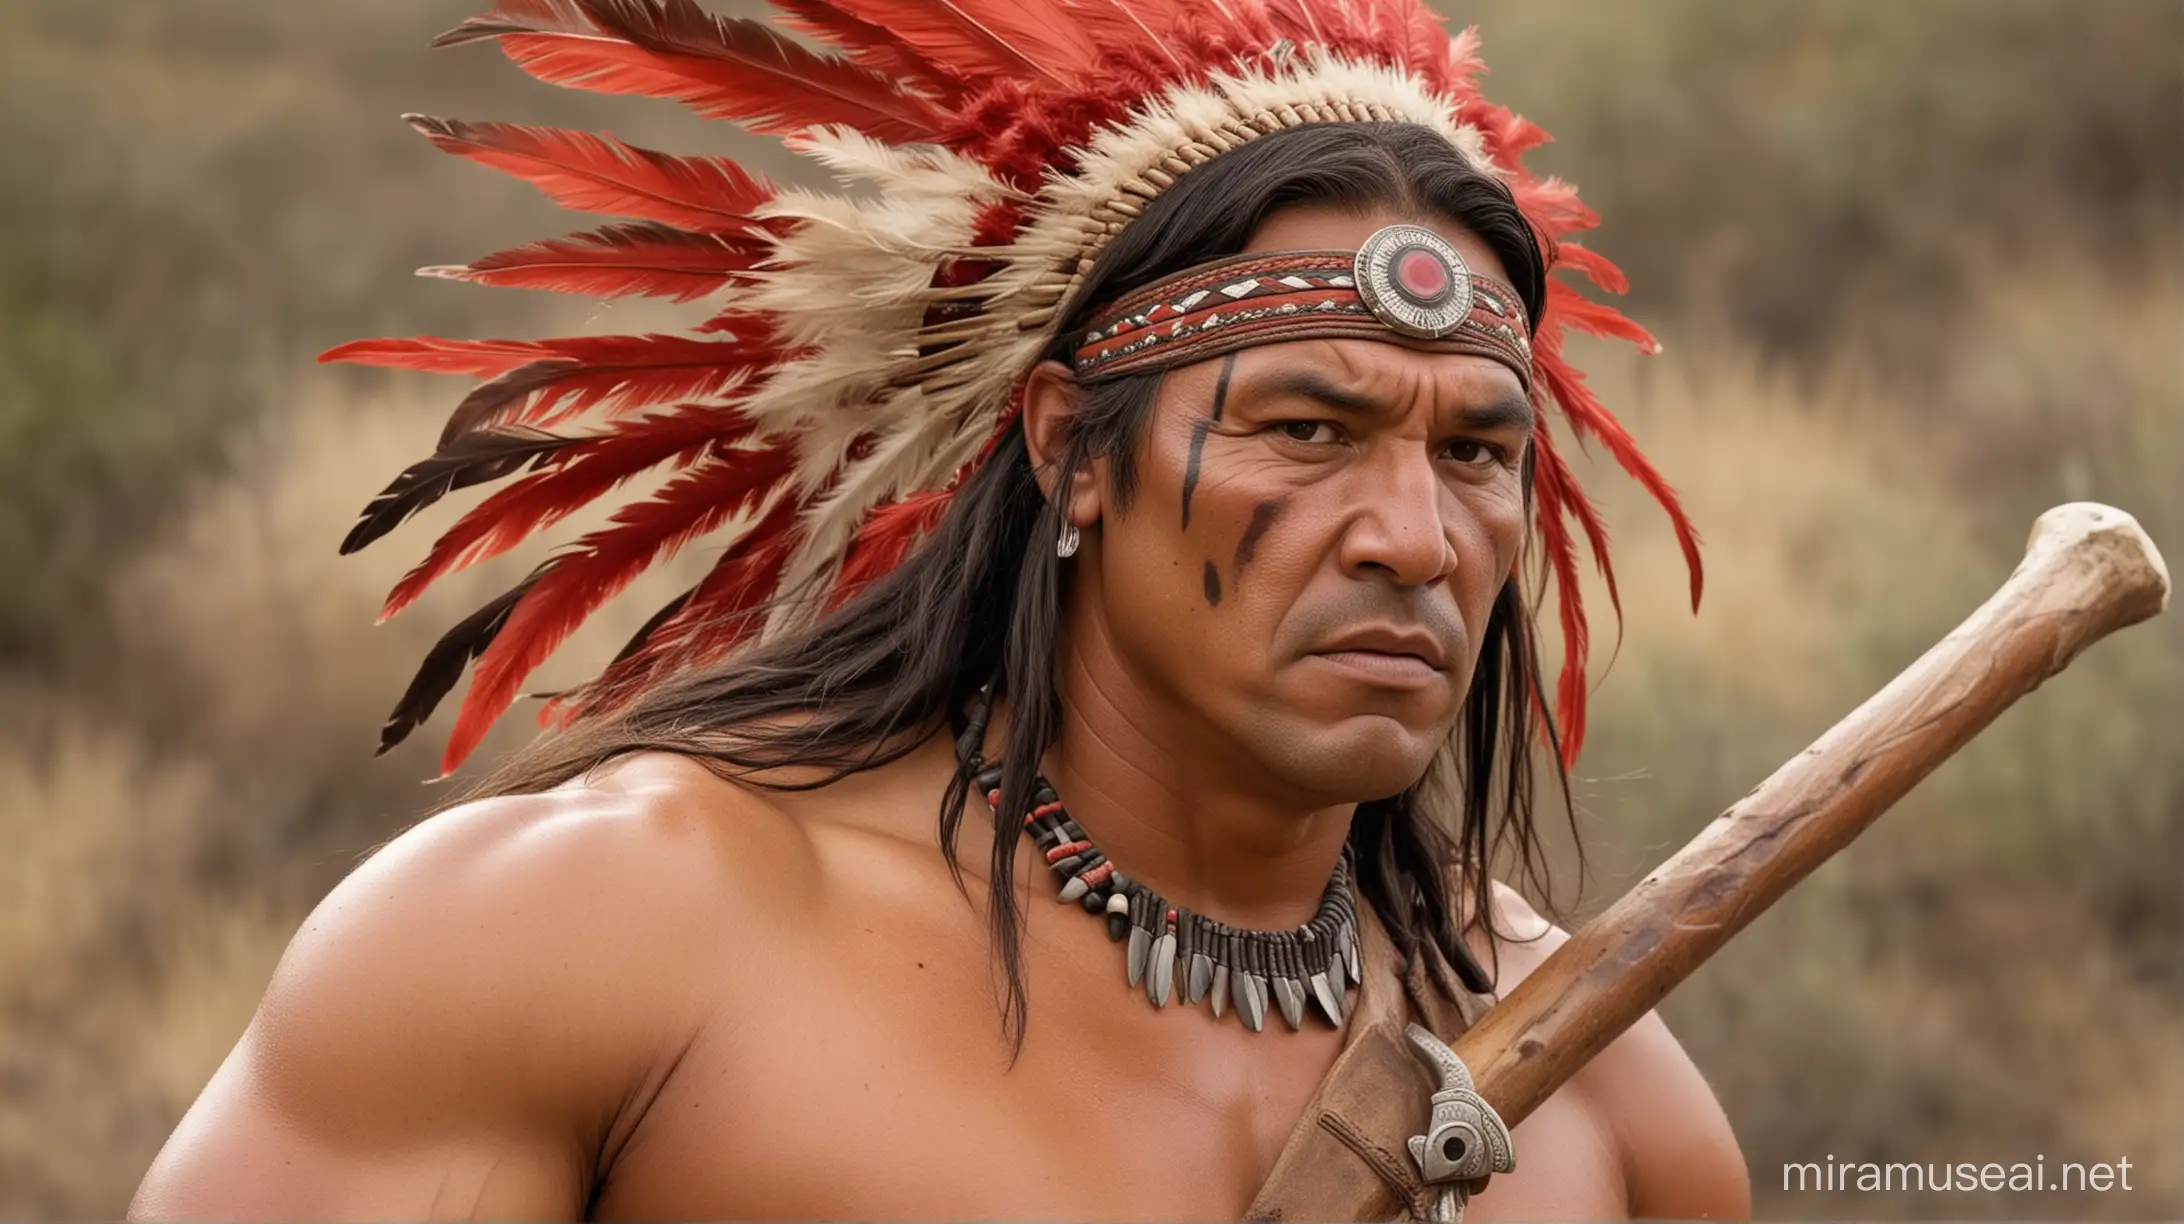 Large Native american man, Stocky buff build, red feathers in hair, holding a tomahawk